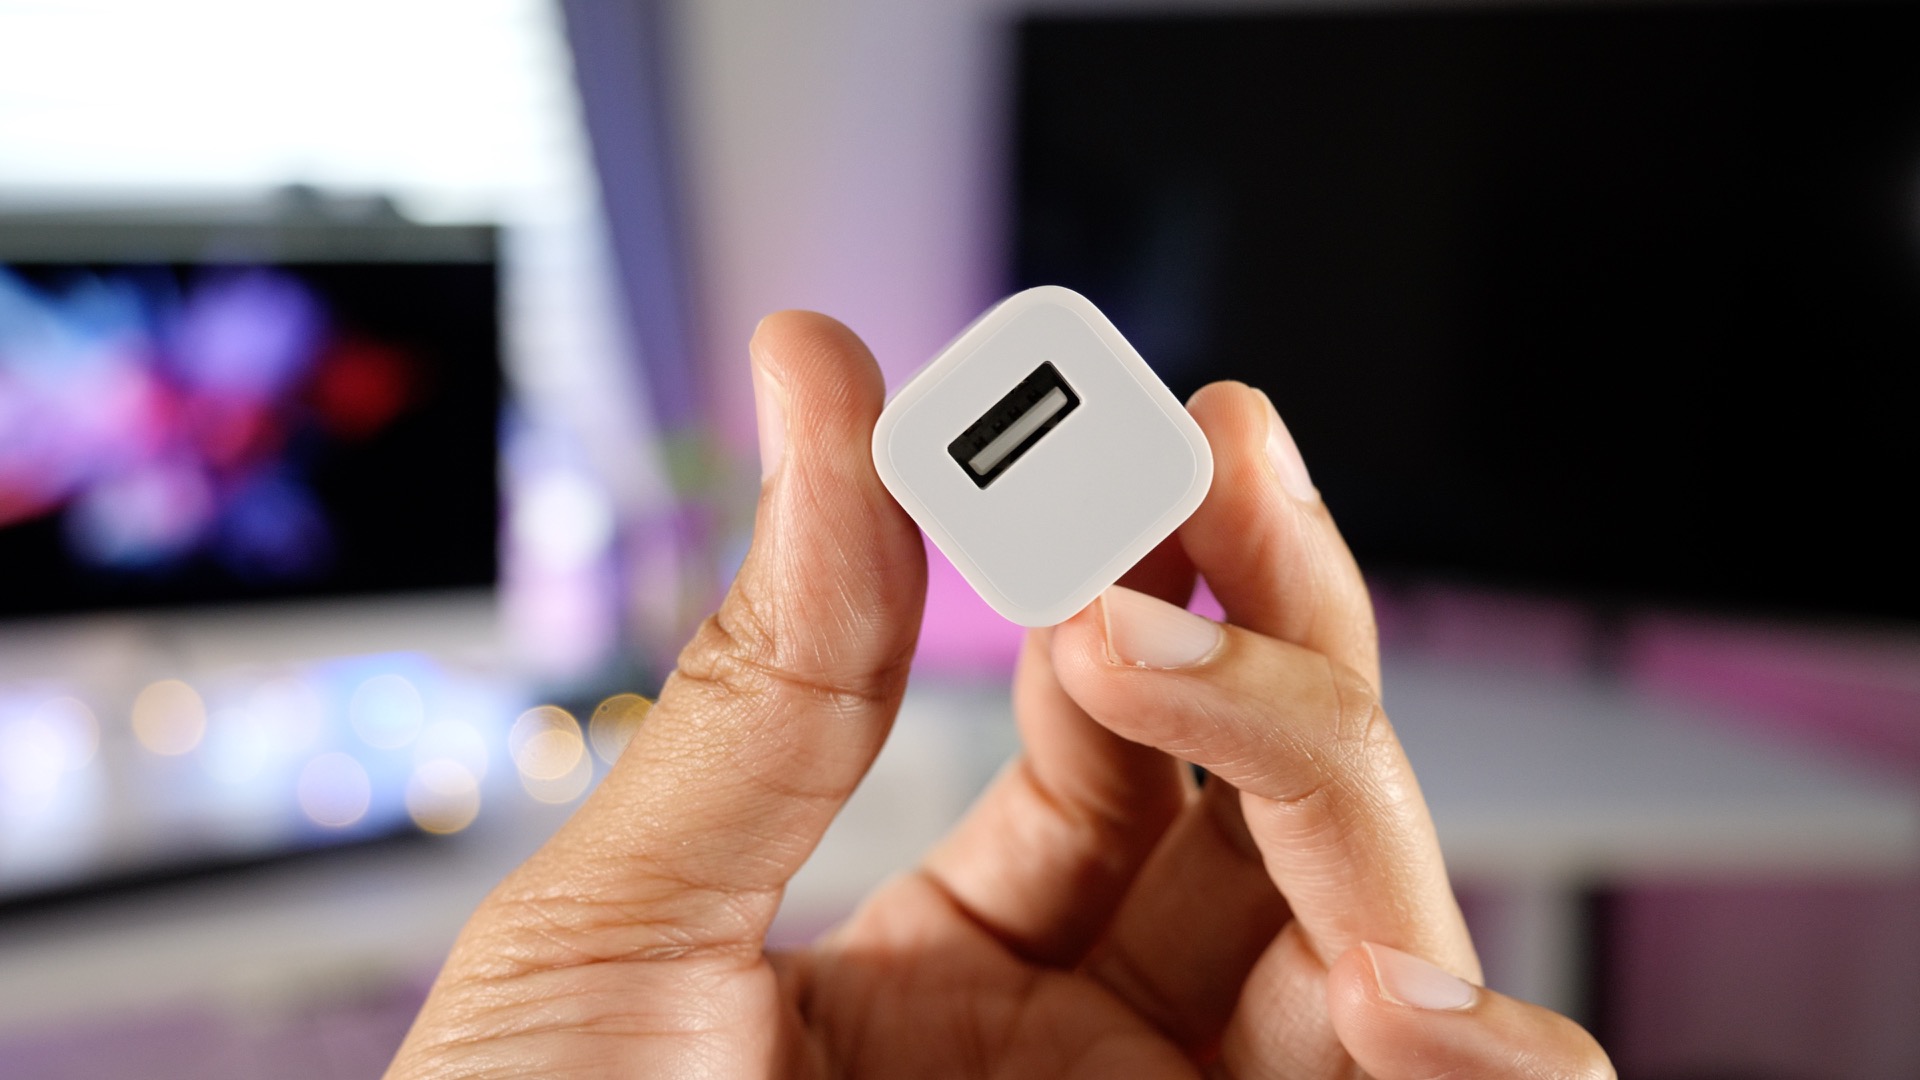 USB Power Adapter now sold out - 9to5Mac